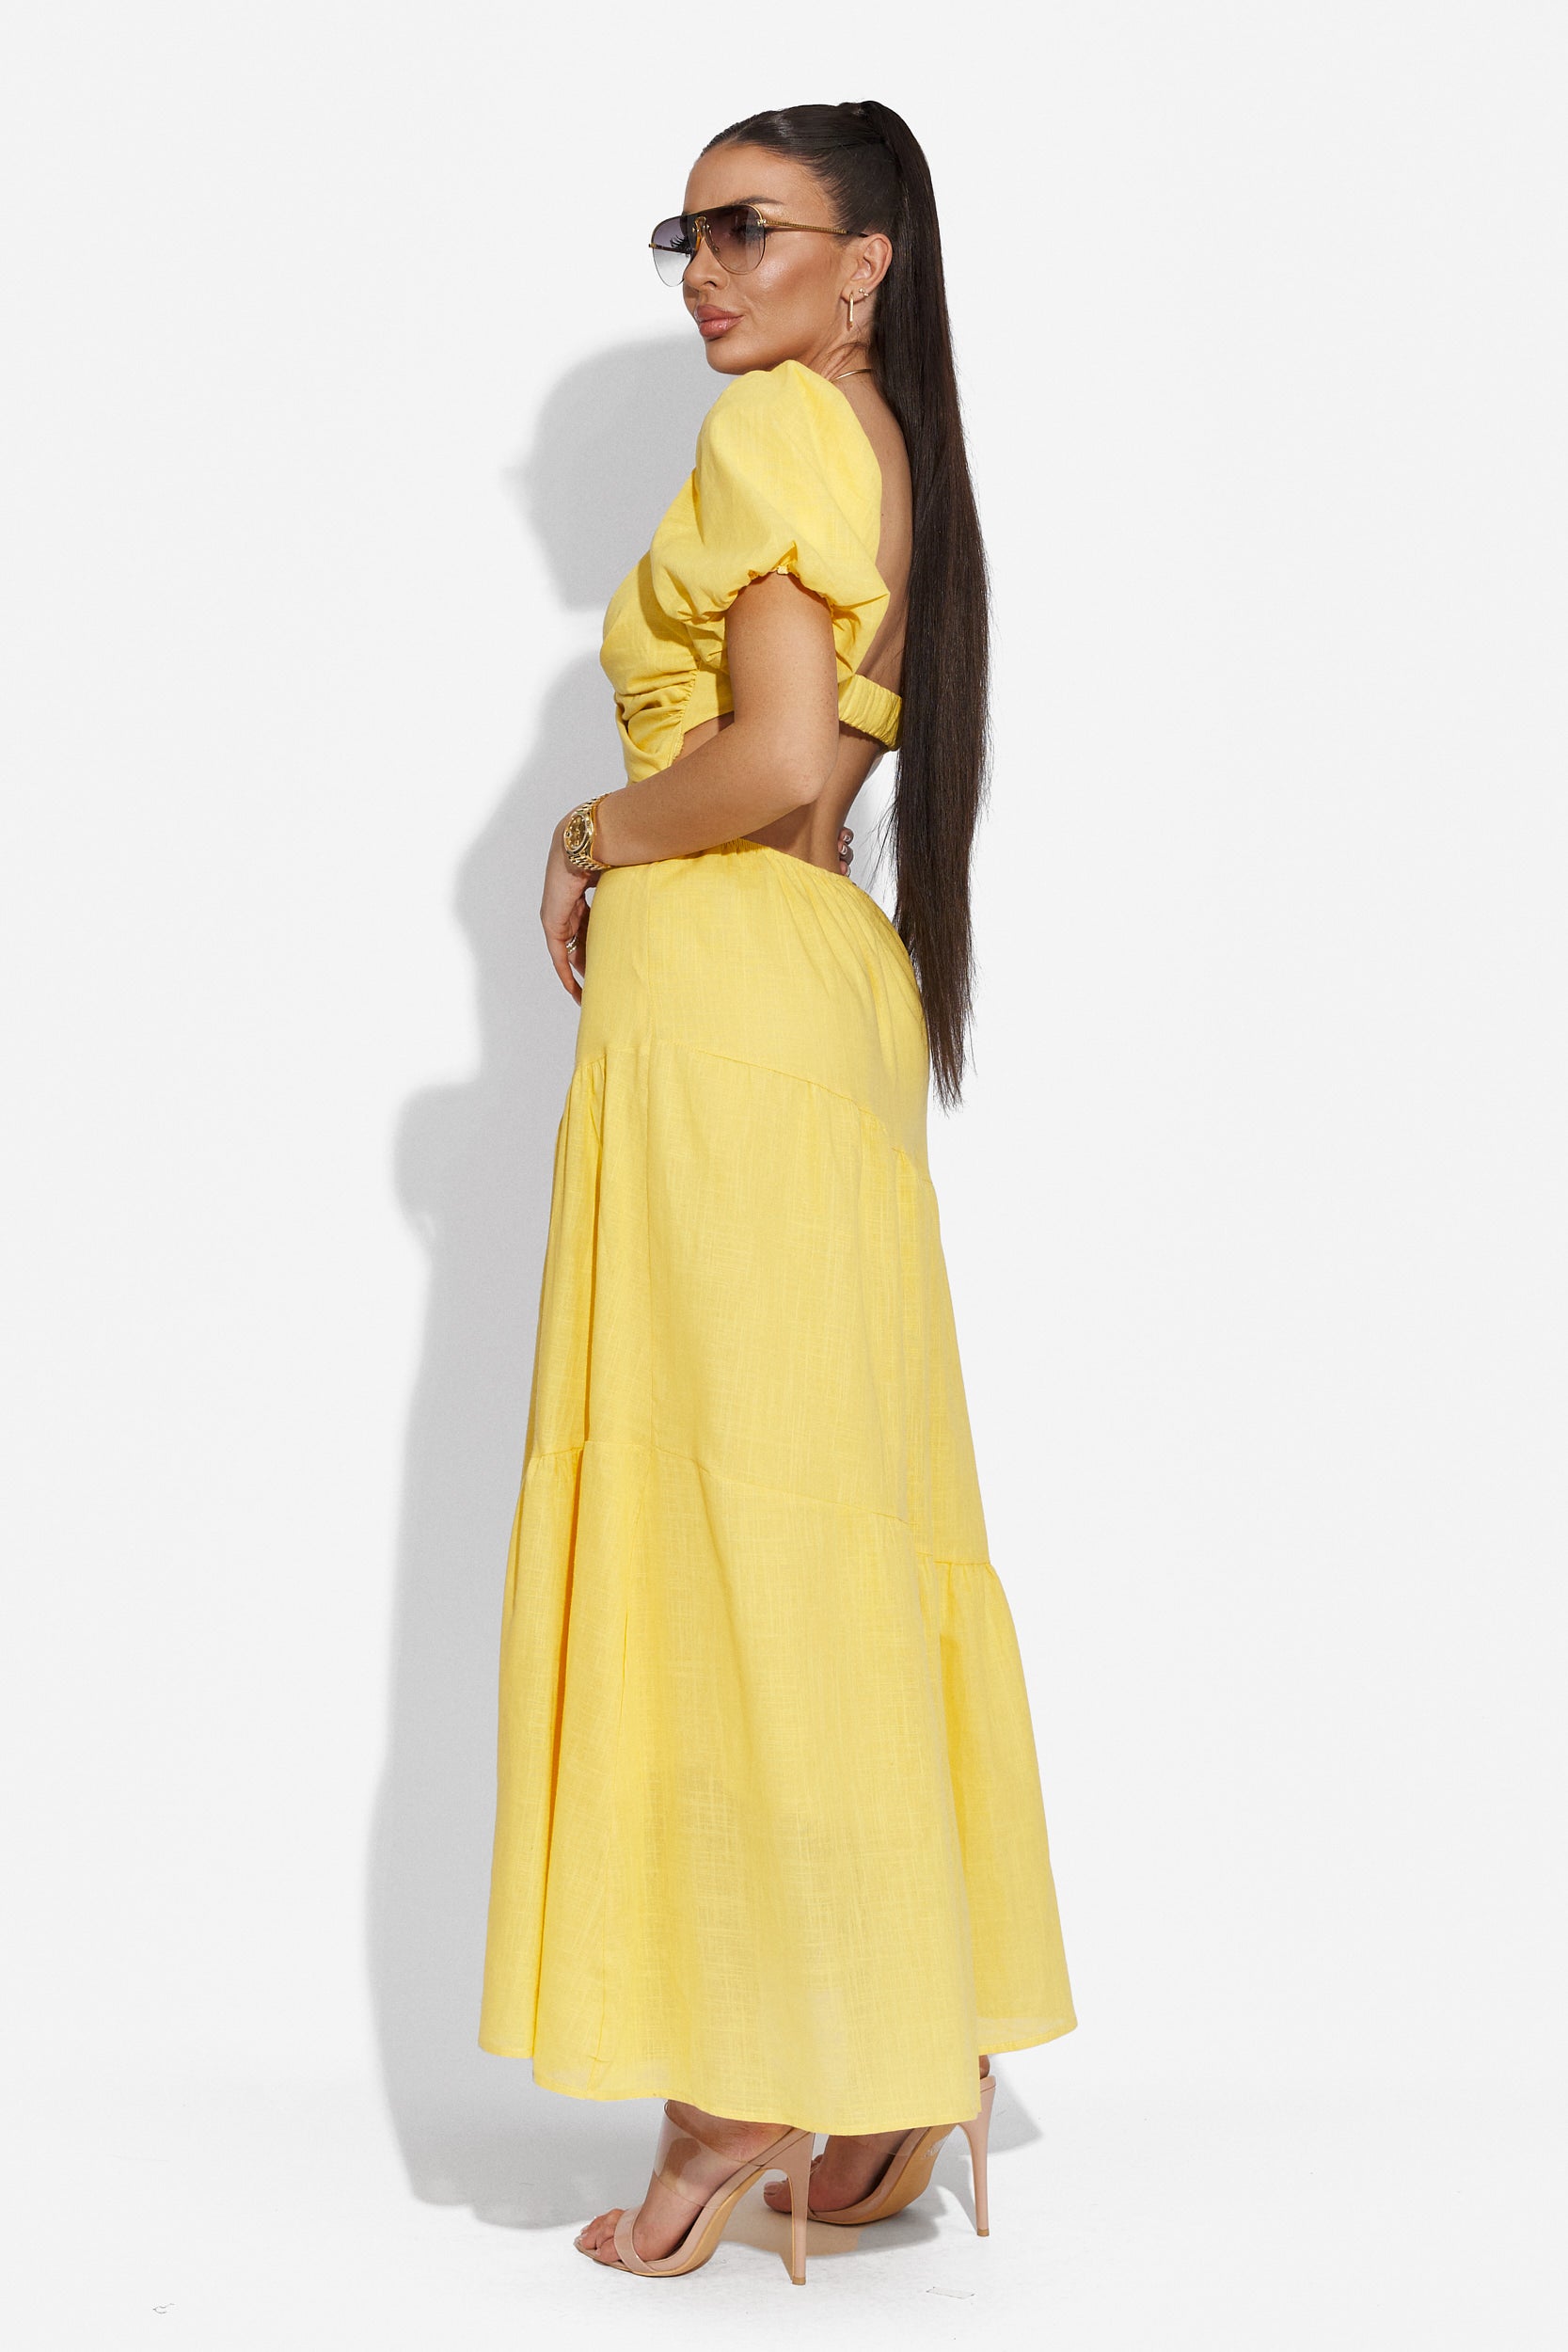 Mosysca Bogas yellow long dress for ladies